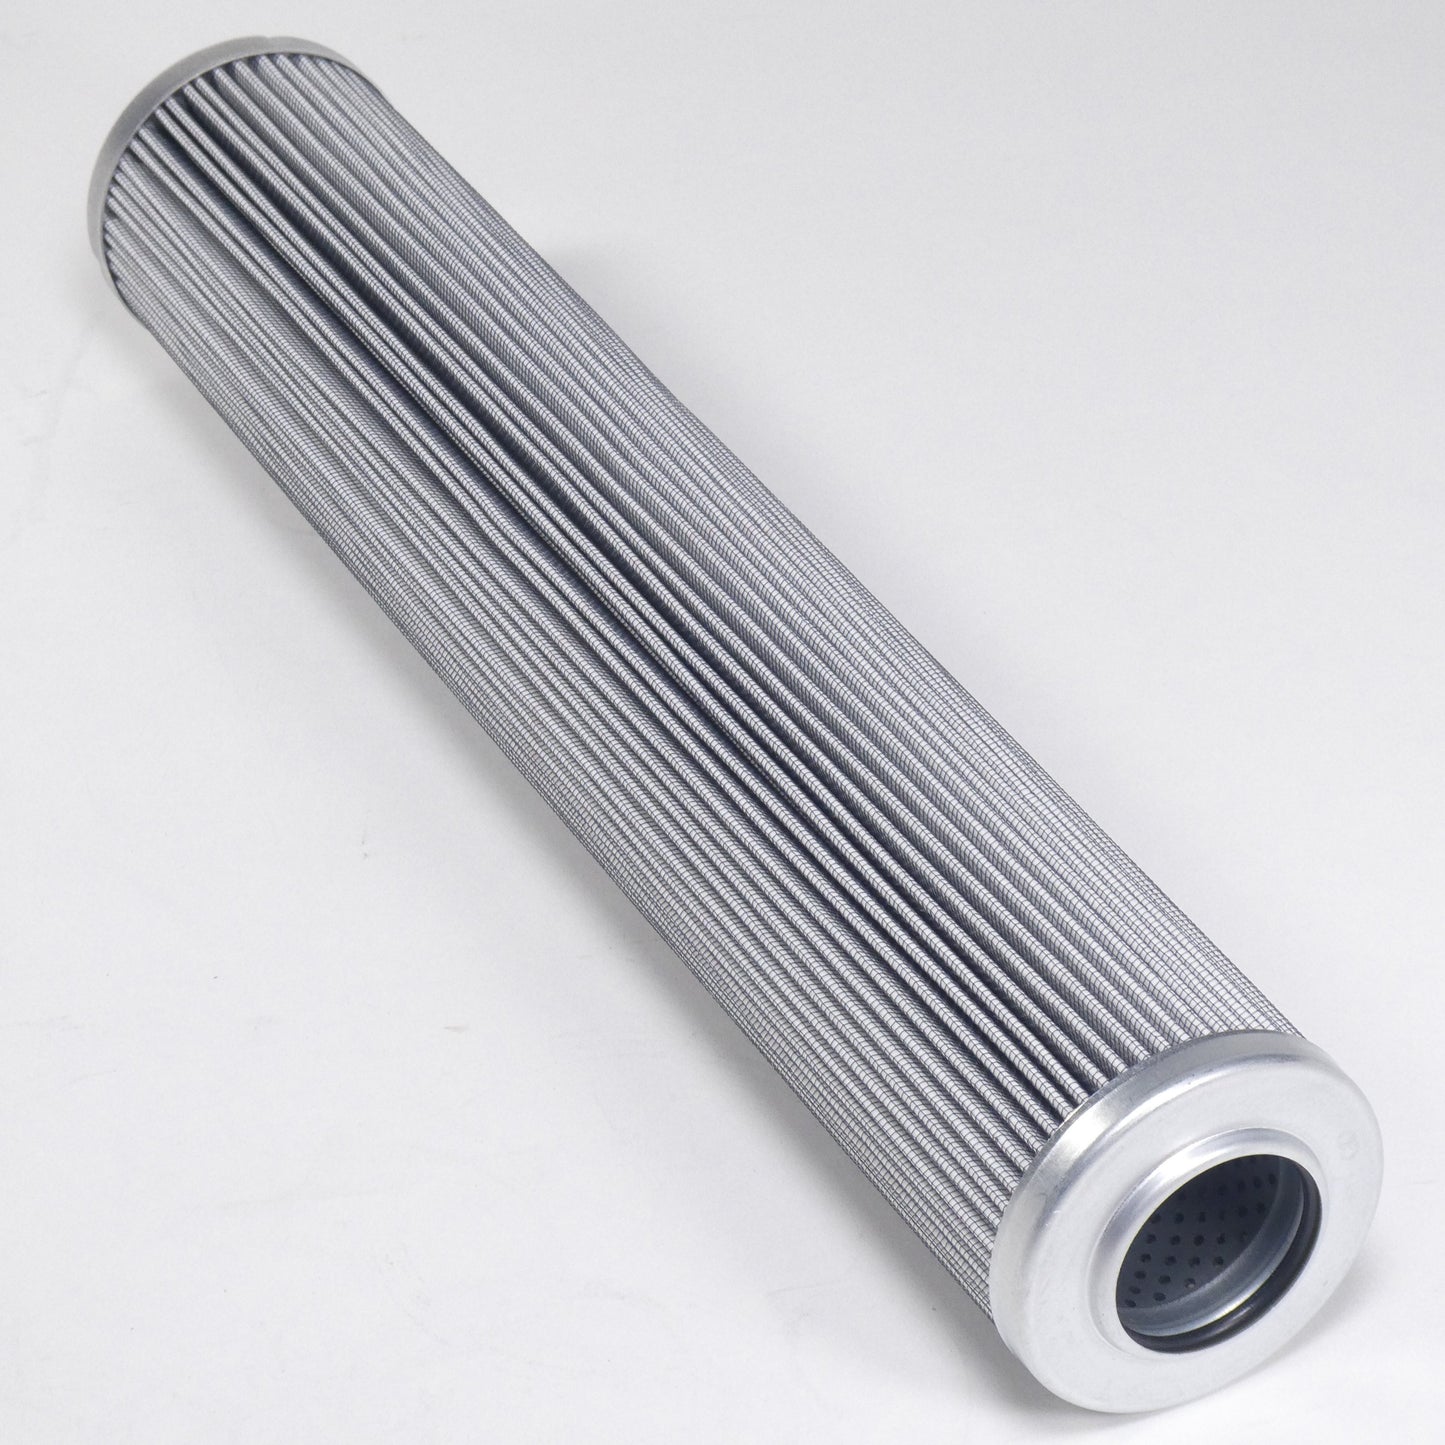 Hydrafil Replacement Filter Element for Internormen 05.9600.25VG.10.E.P.16